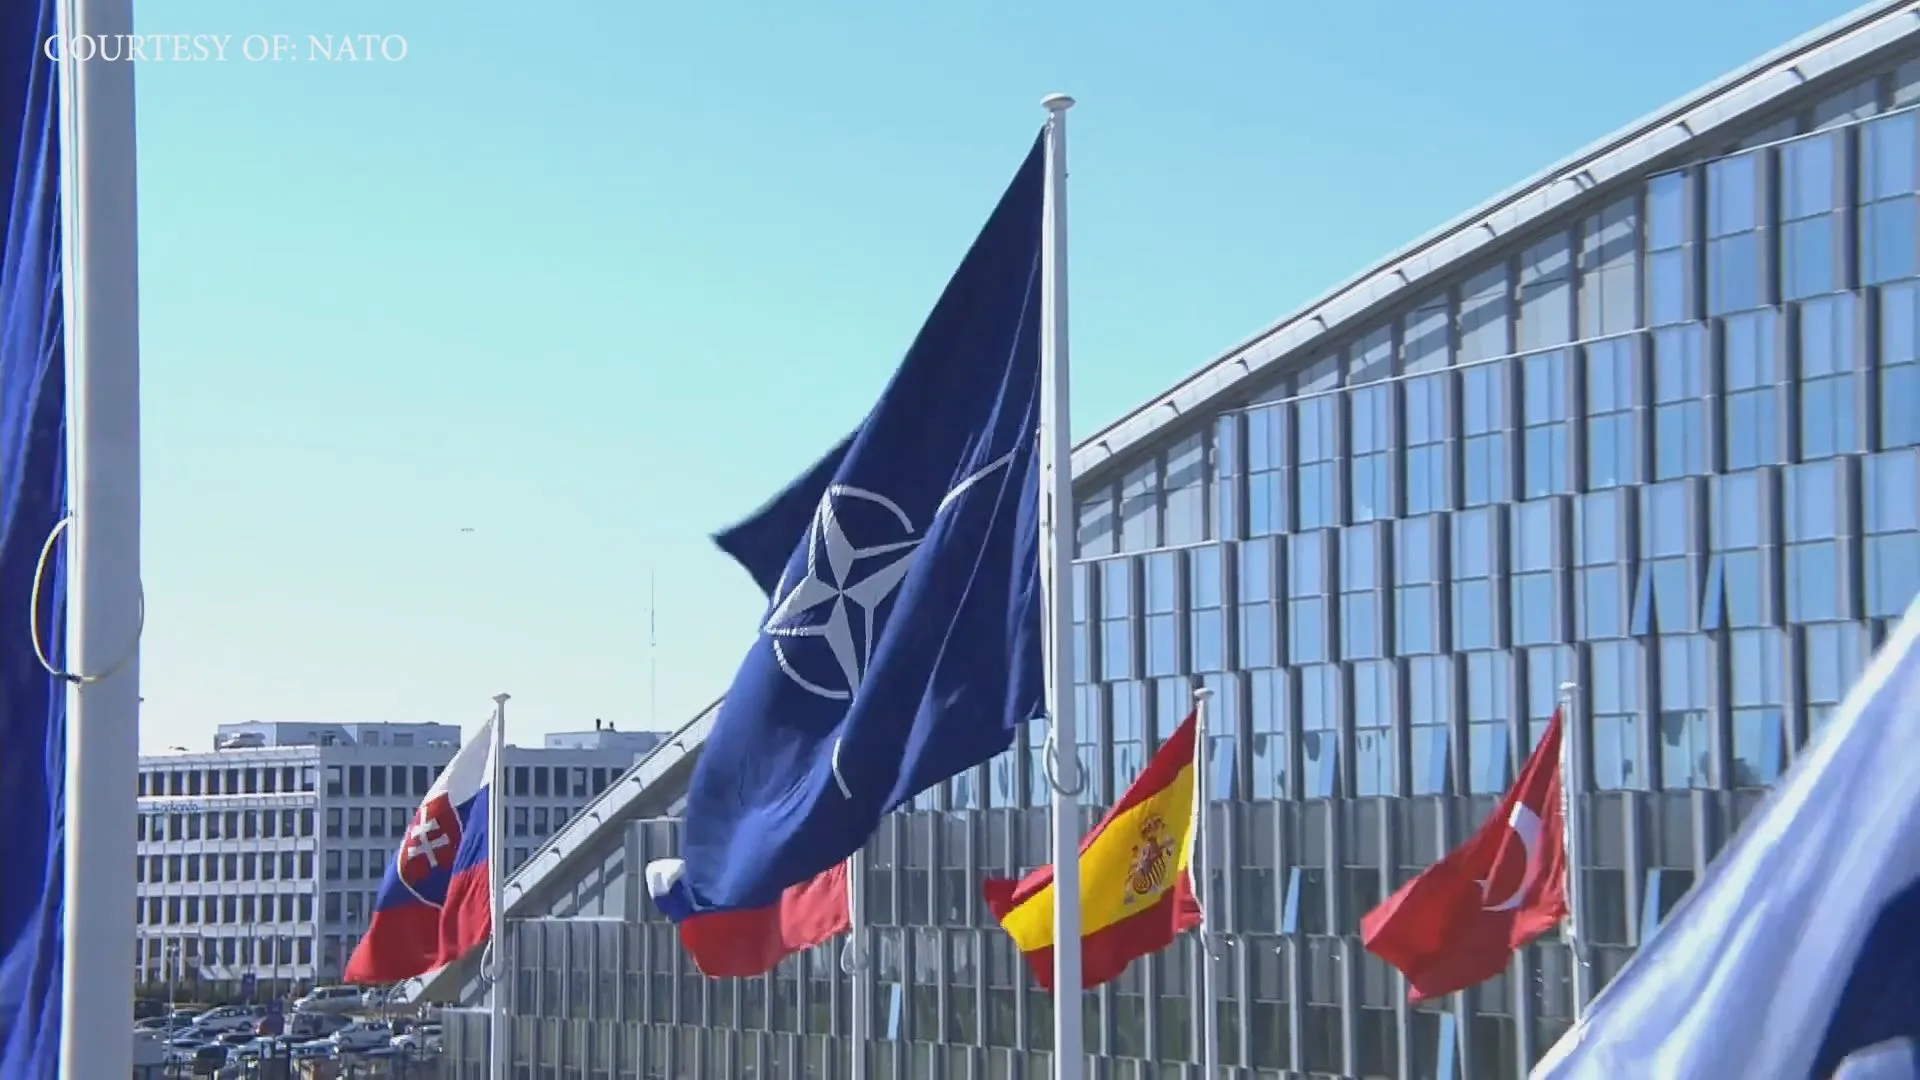 NATO Summit Could Focus on Building NATO’s European Members